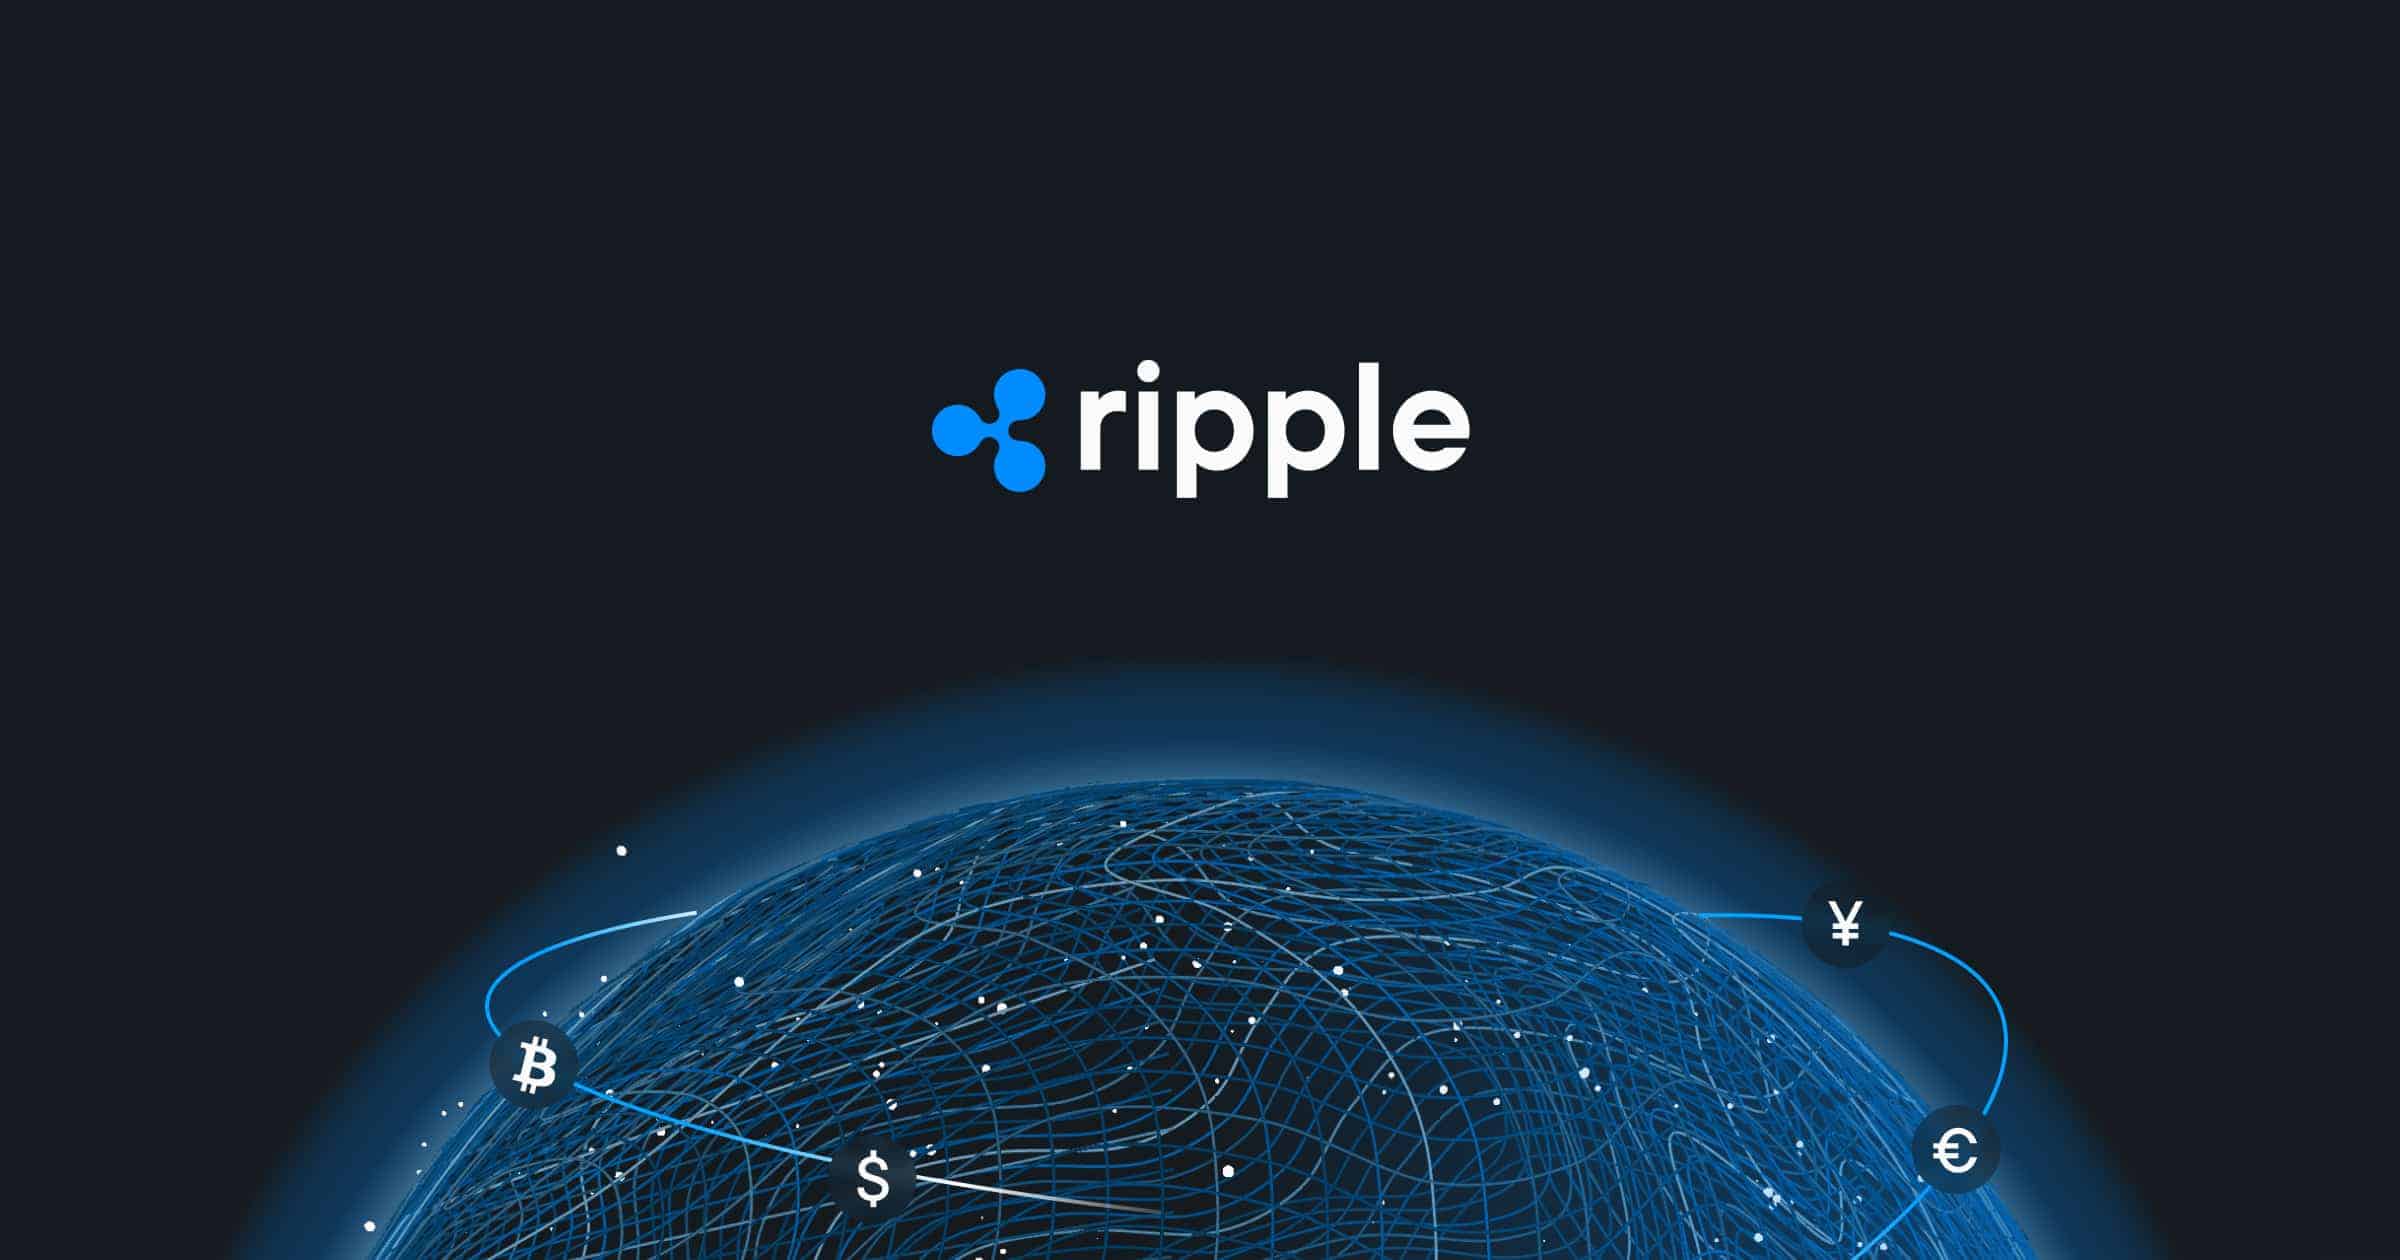 Ripple Partners up With QNB and China Bank To Deploy Remittance Services